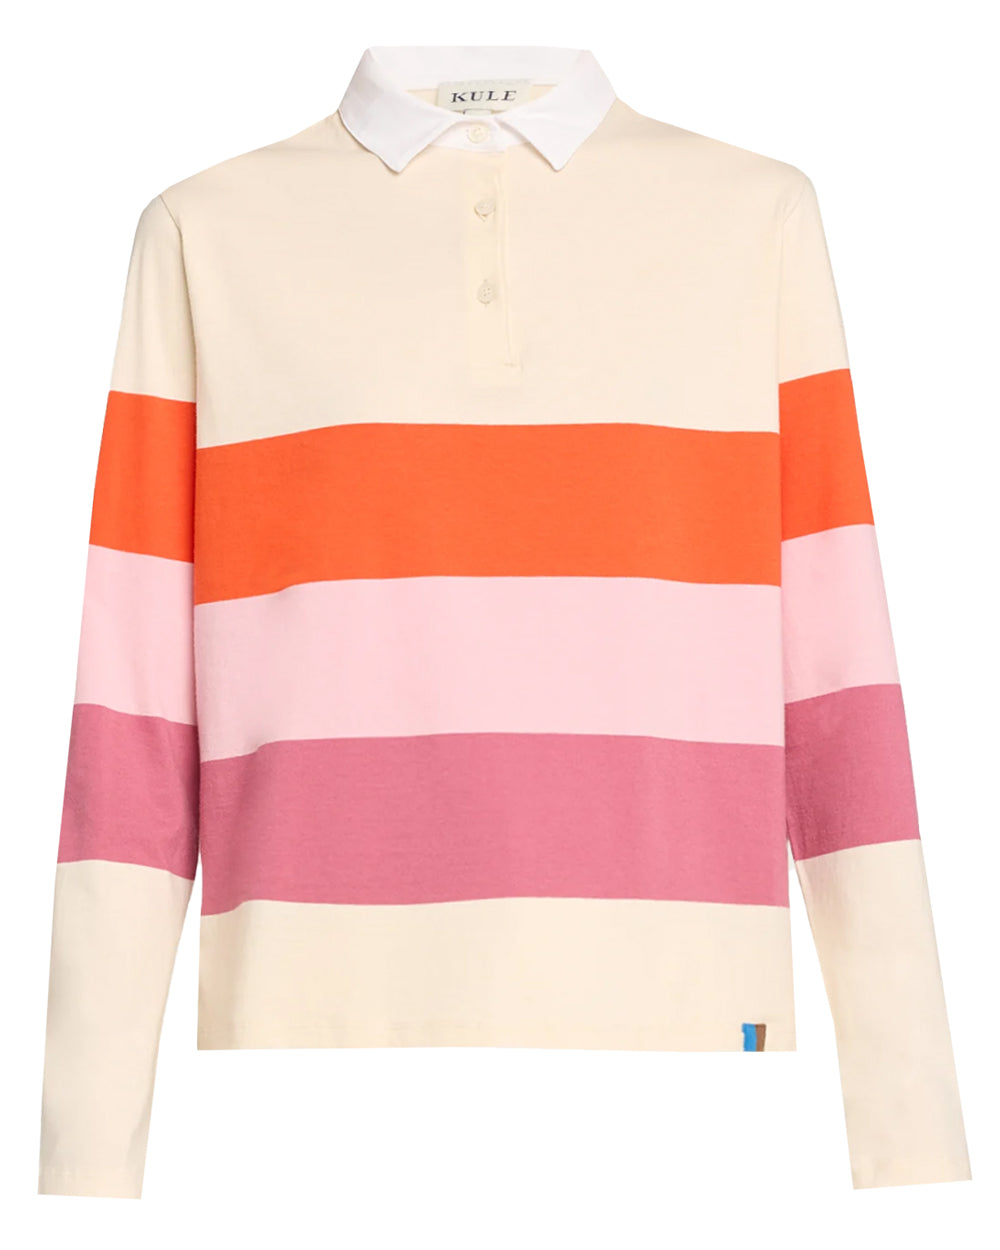 The Colorblock Rugby Shirt in Poppy Blush Raspberry Stripe